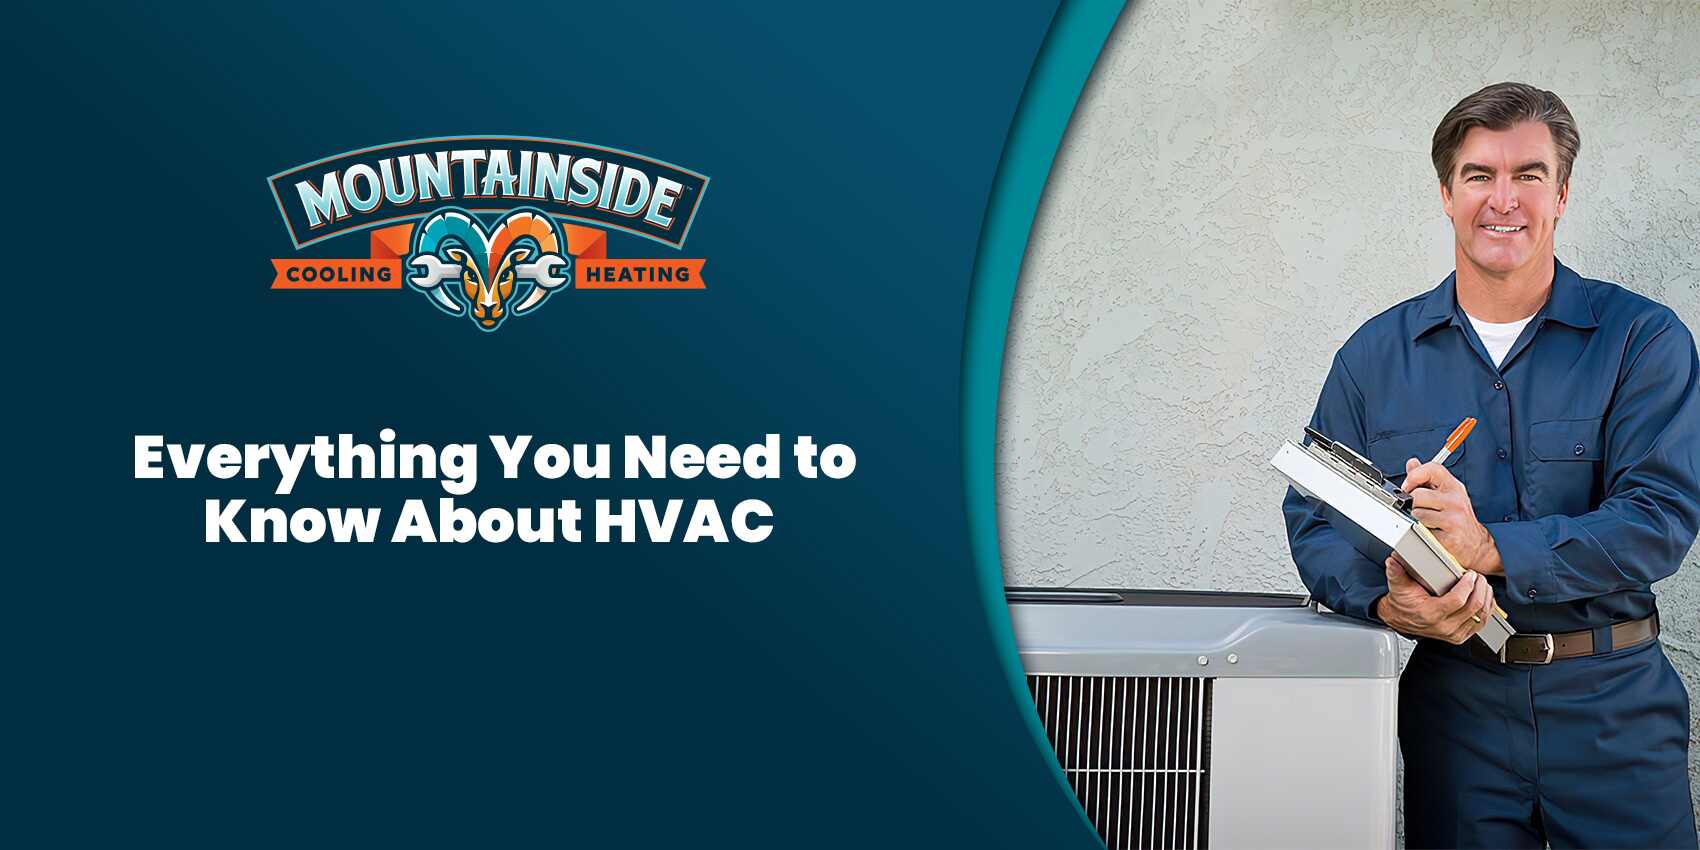 everything you need to know about HVAC blog title with technician photo and mountainside logo image